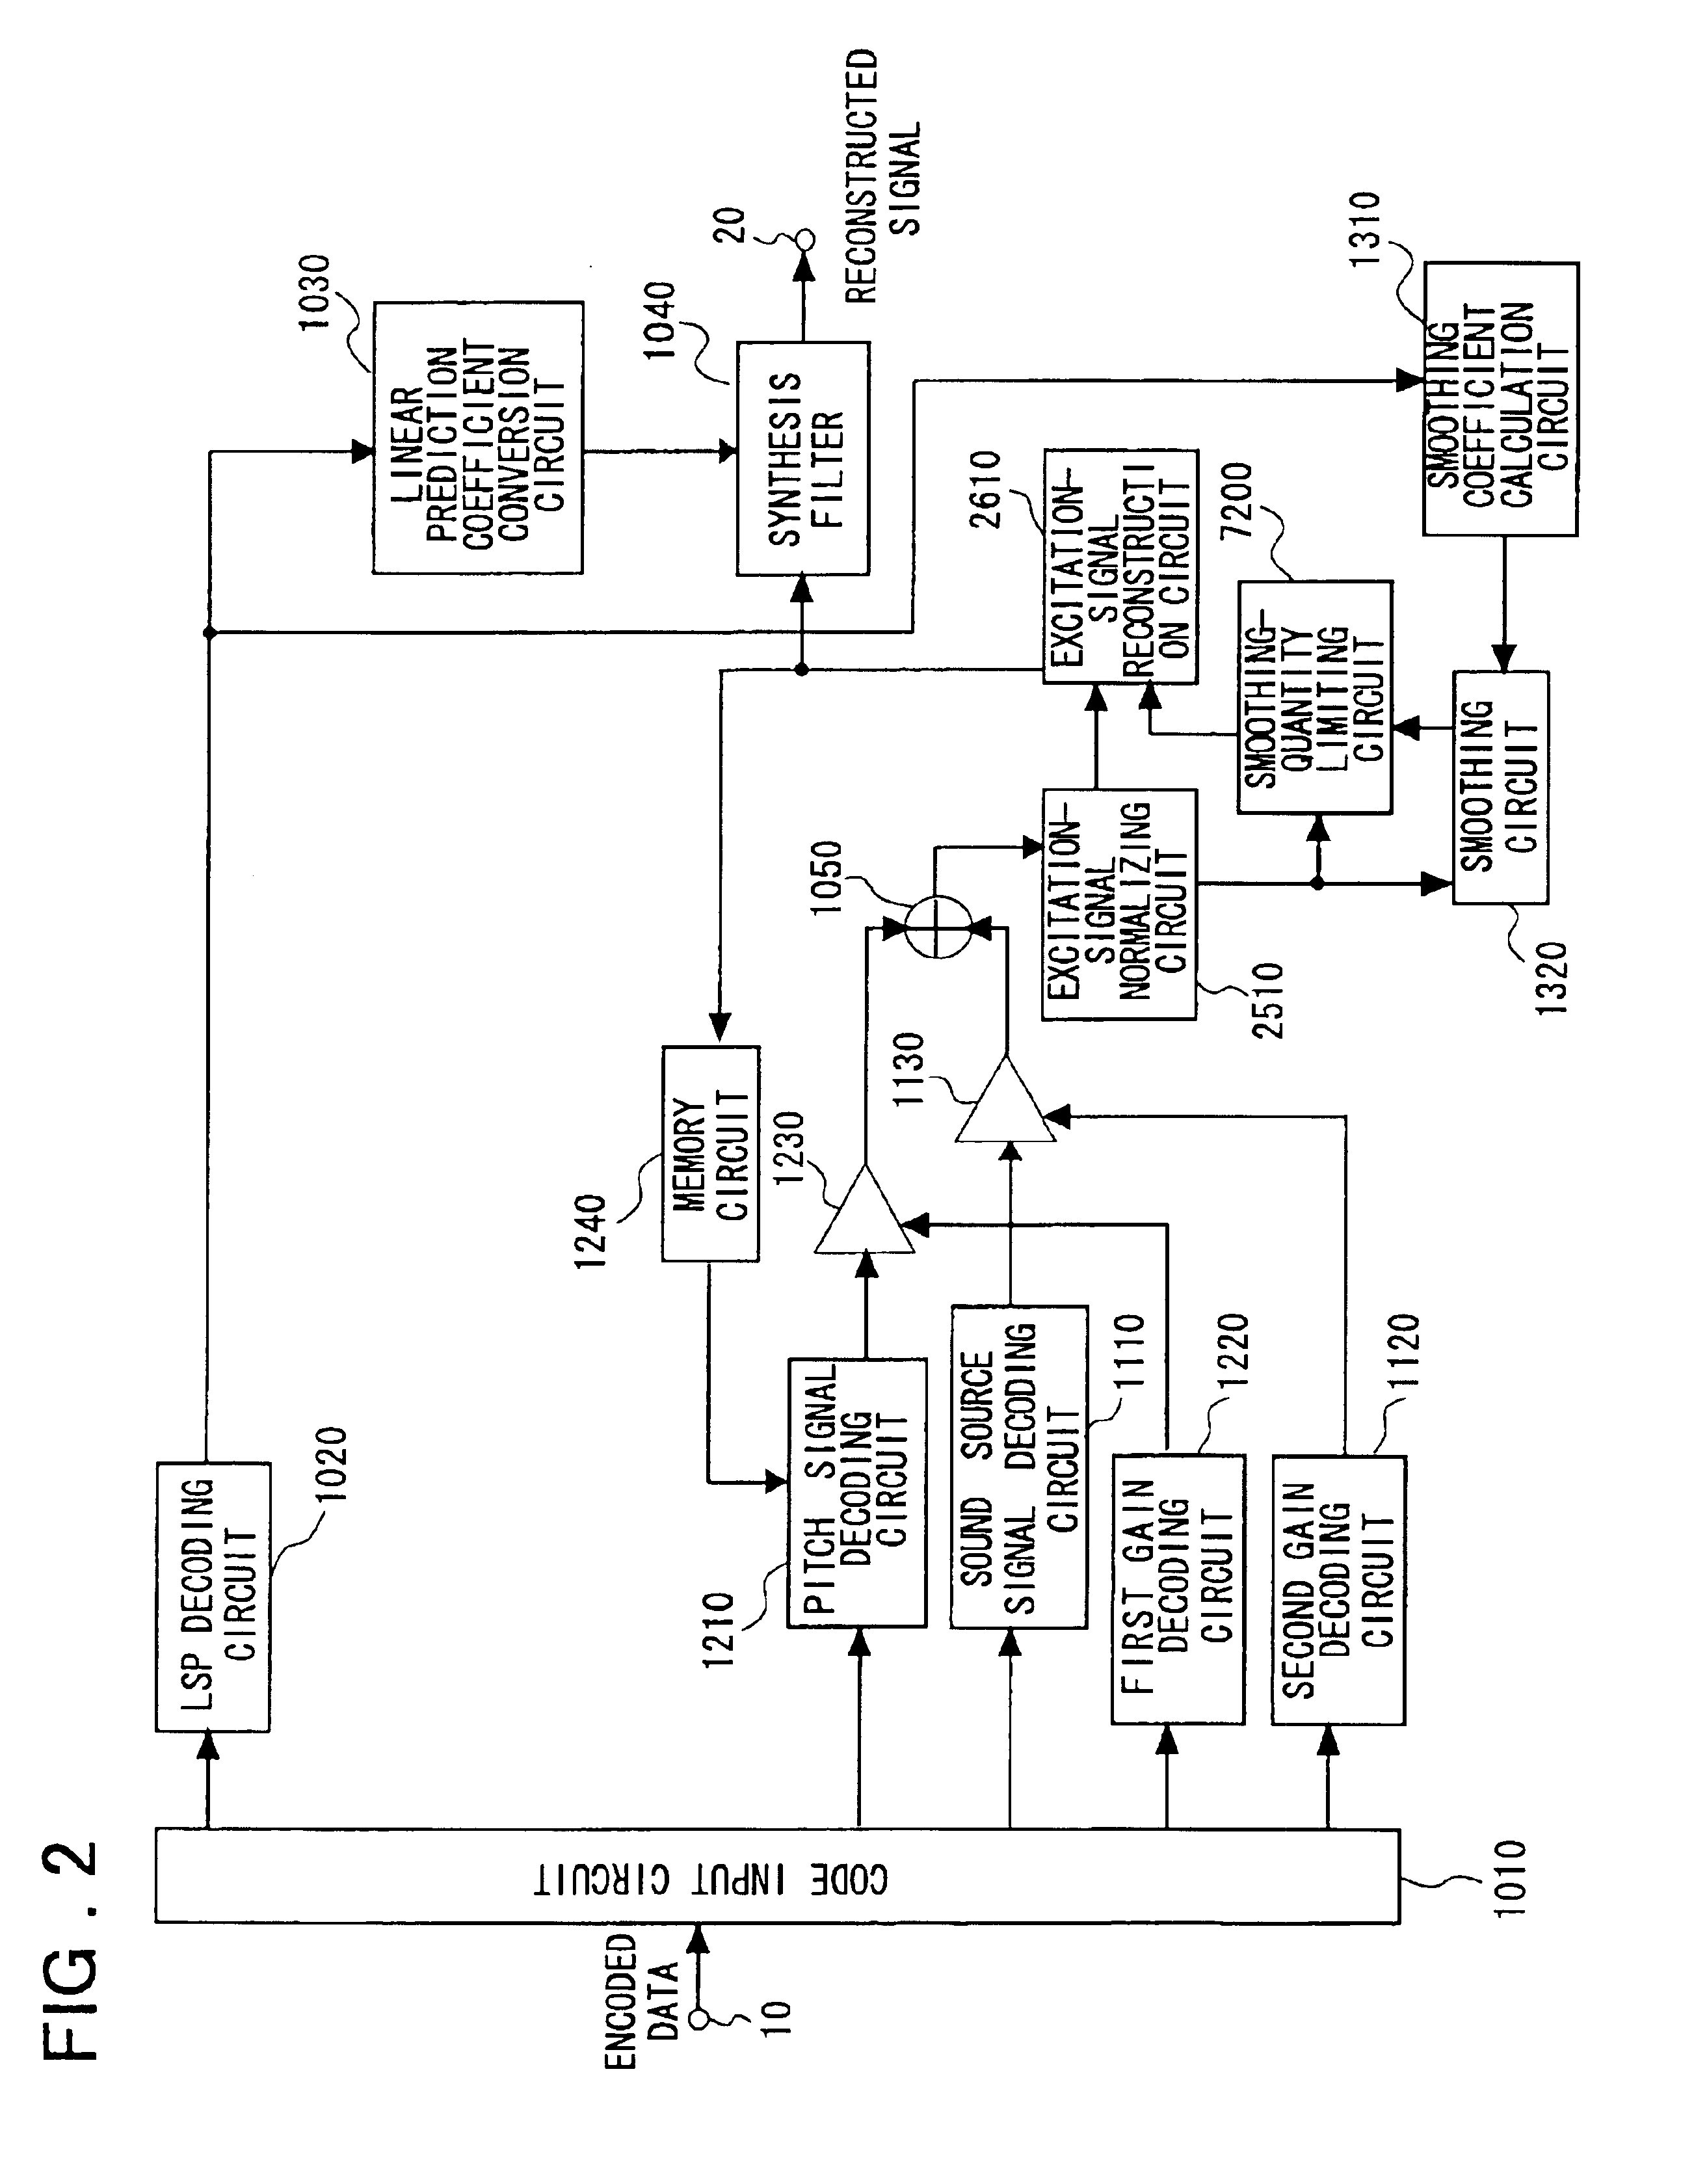 Speech signal decoding method and apparatus, speech signal encoding/decoding method and apparatus, and program product therefor